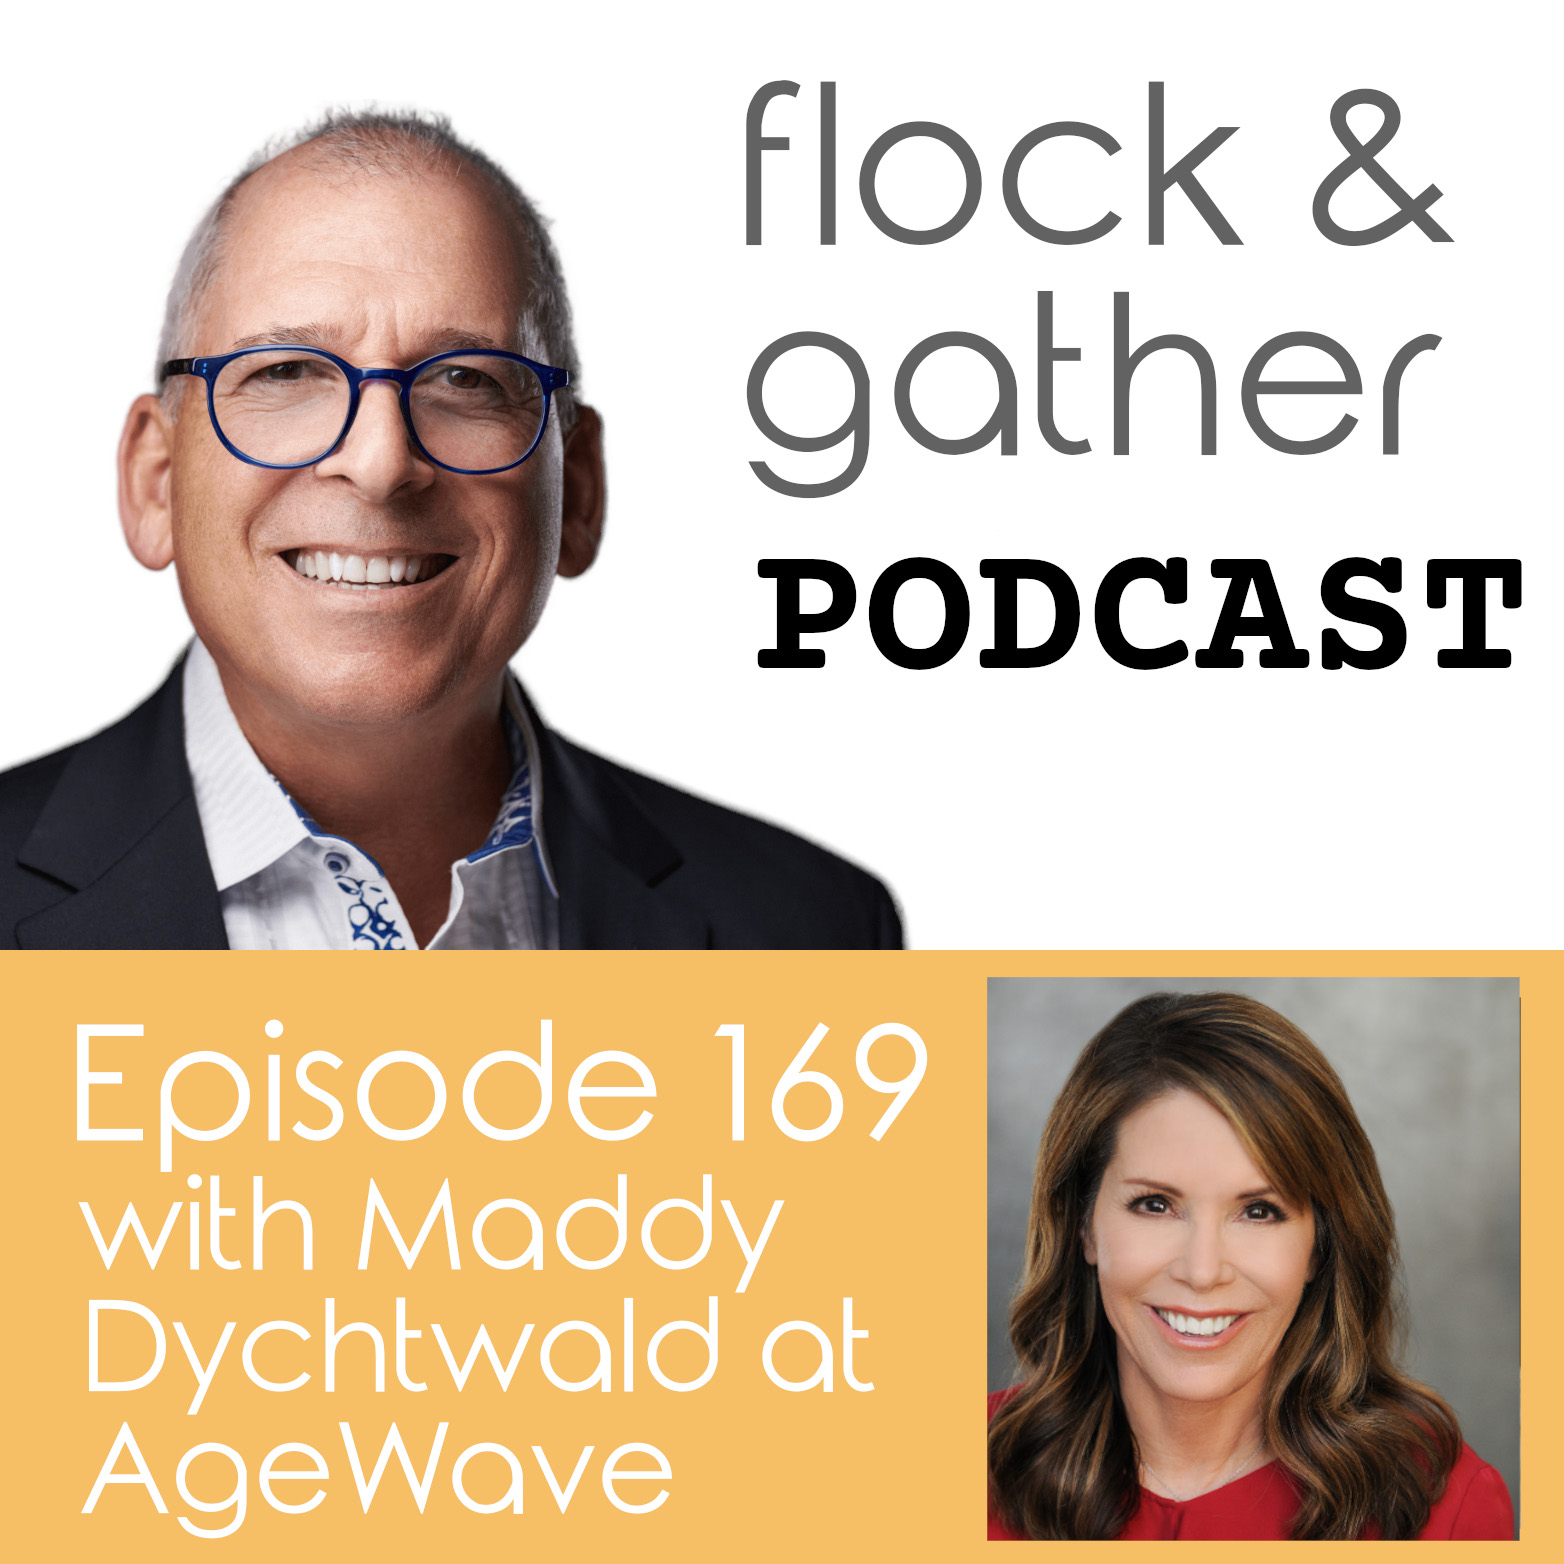 Flock and Gather Podcast.  Episode 169 with Maddy Dychtwald at AgeWave!